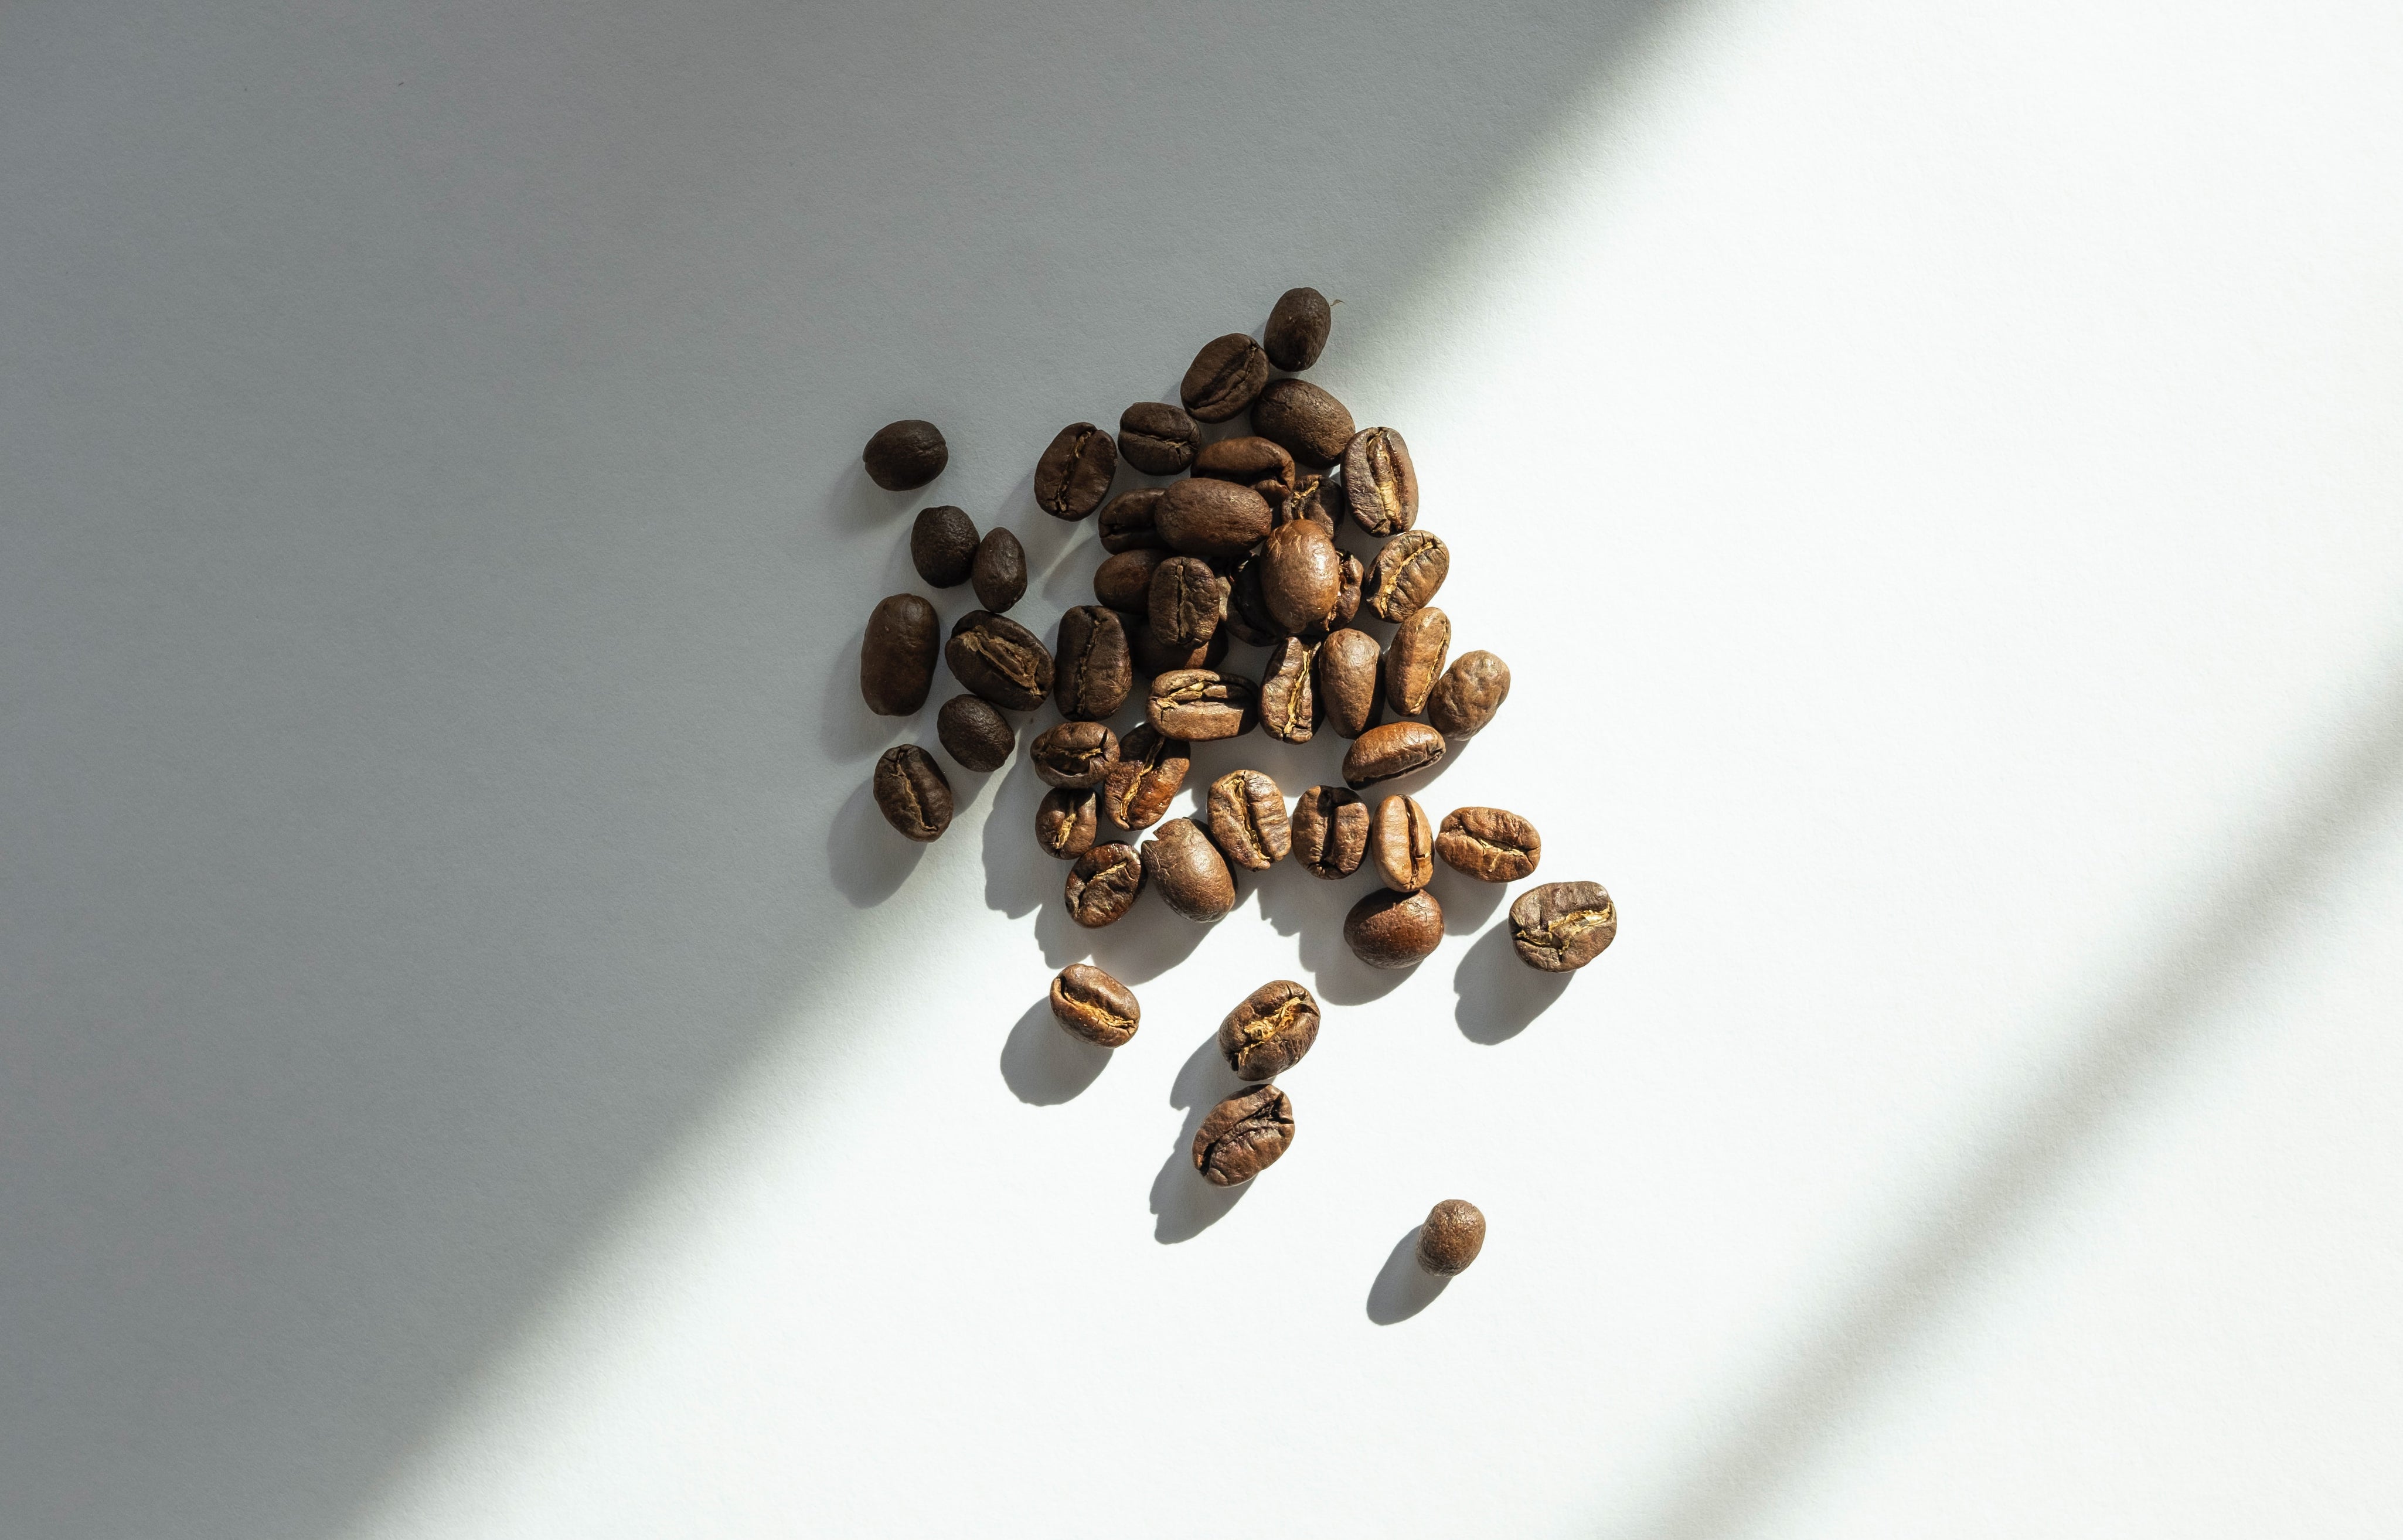 13 Clever Ways to Use Old Coffee Beans